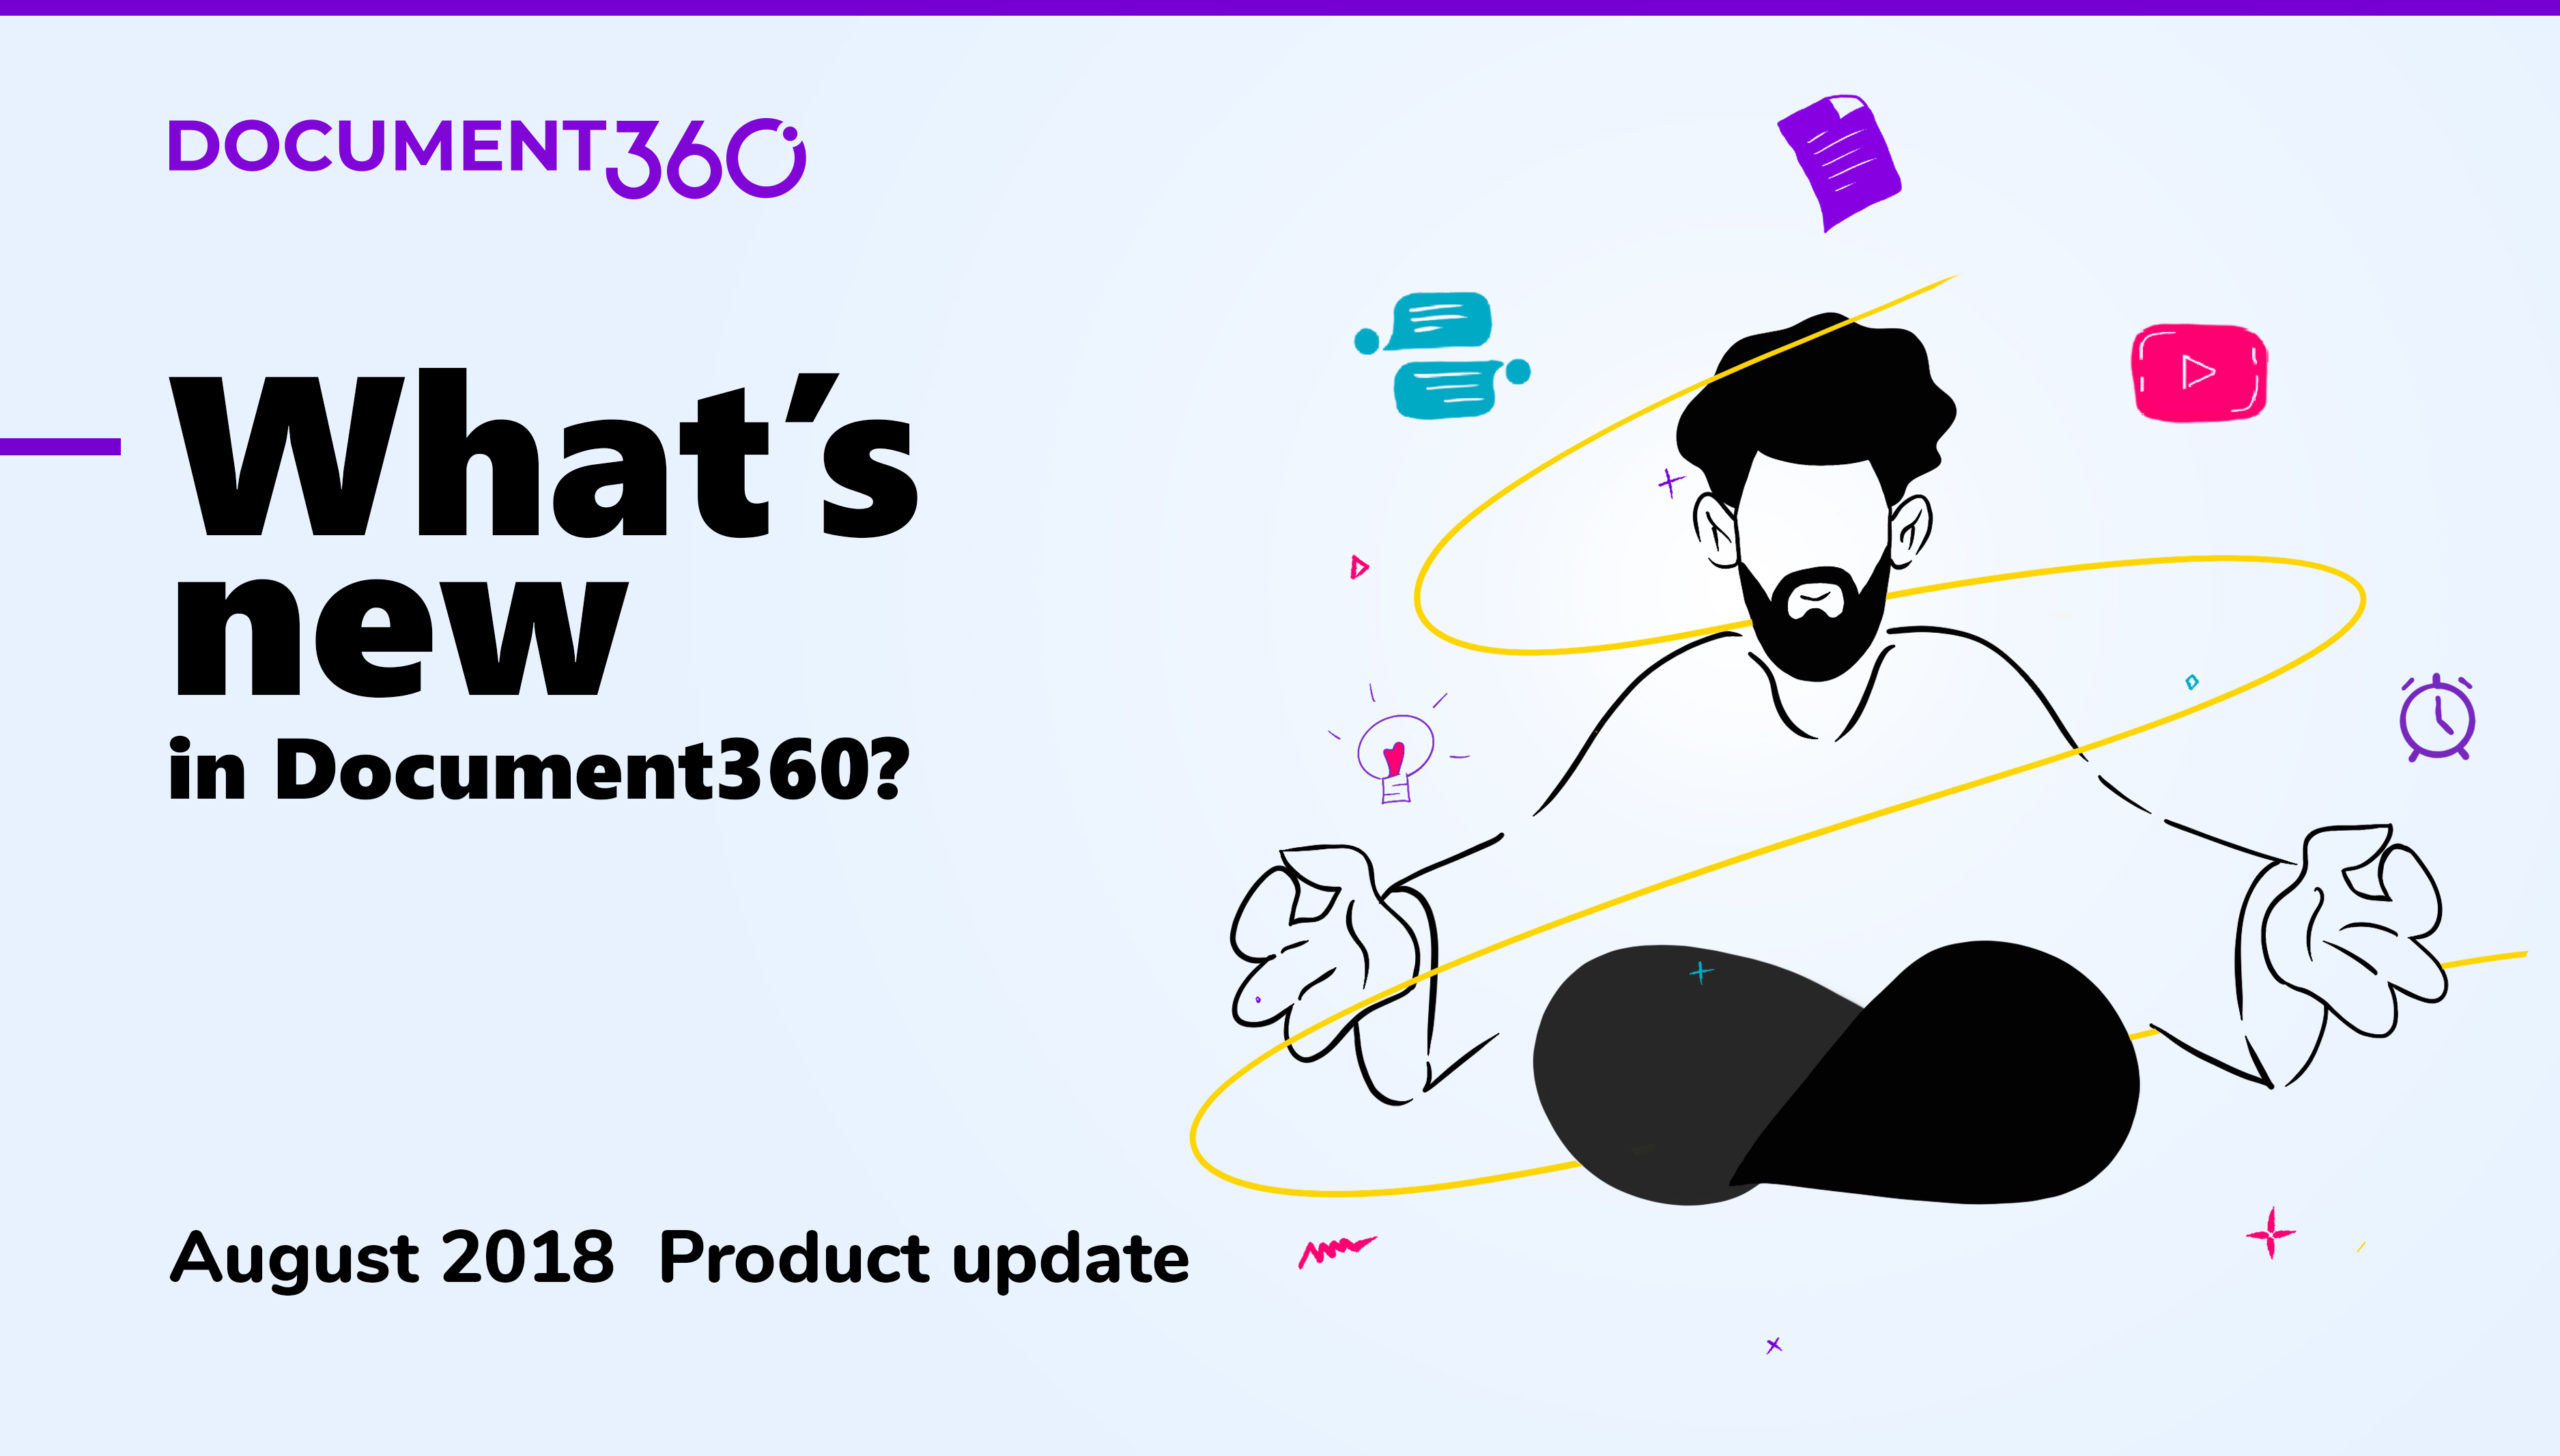 August Product update - Document360